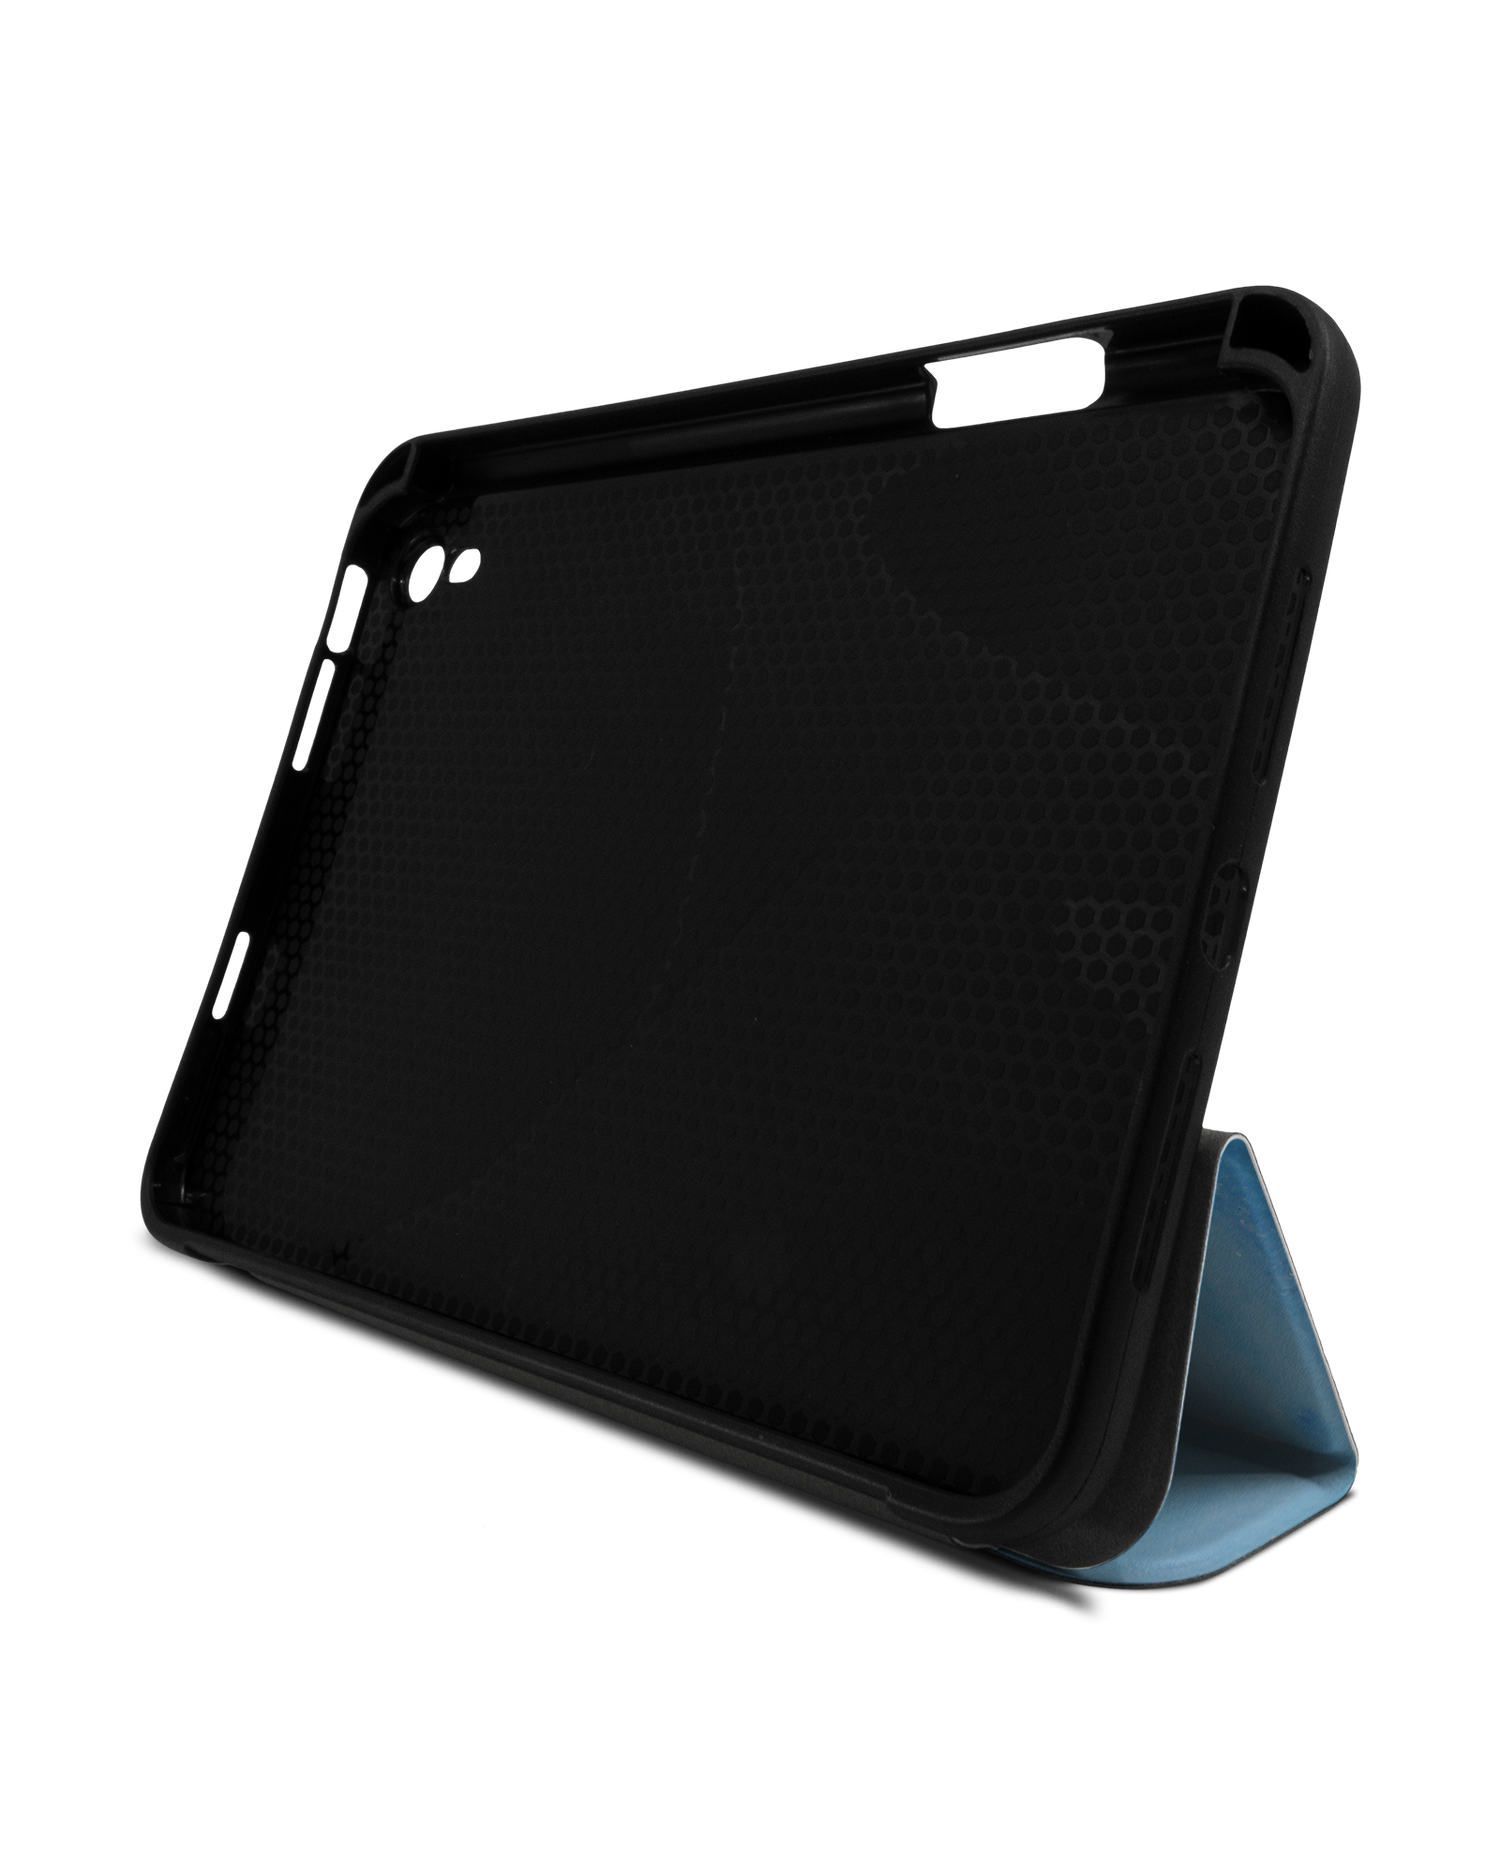 Cool Blues iPad Case with Pencil Holder Apple iPad mini 6 (2021): Set up in landscape format (front view)